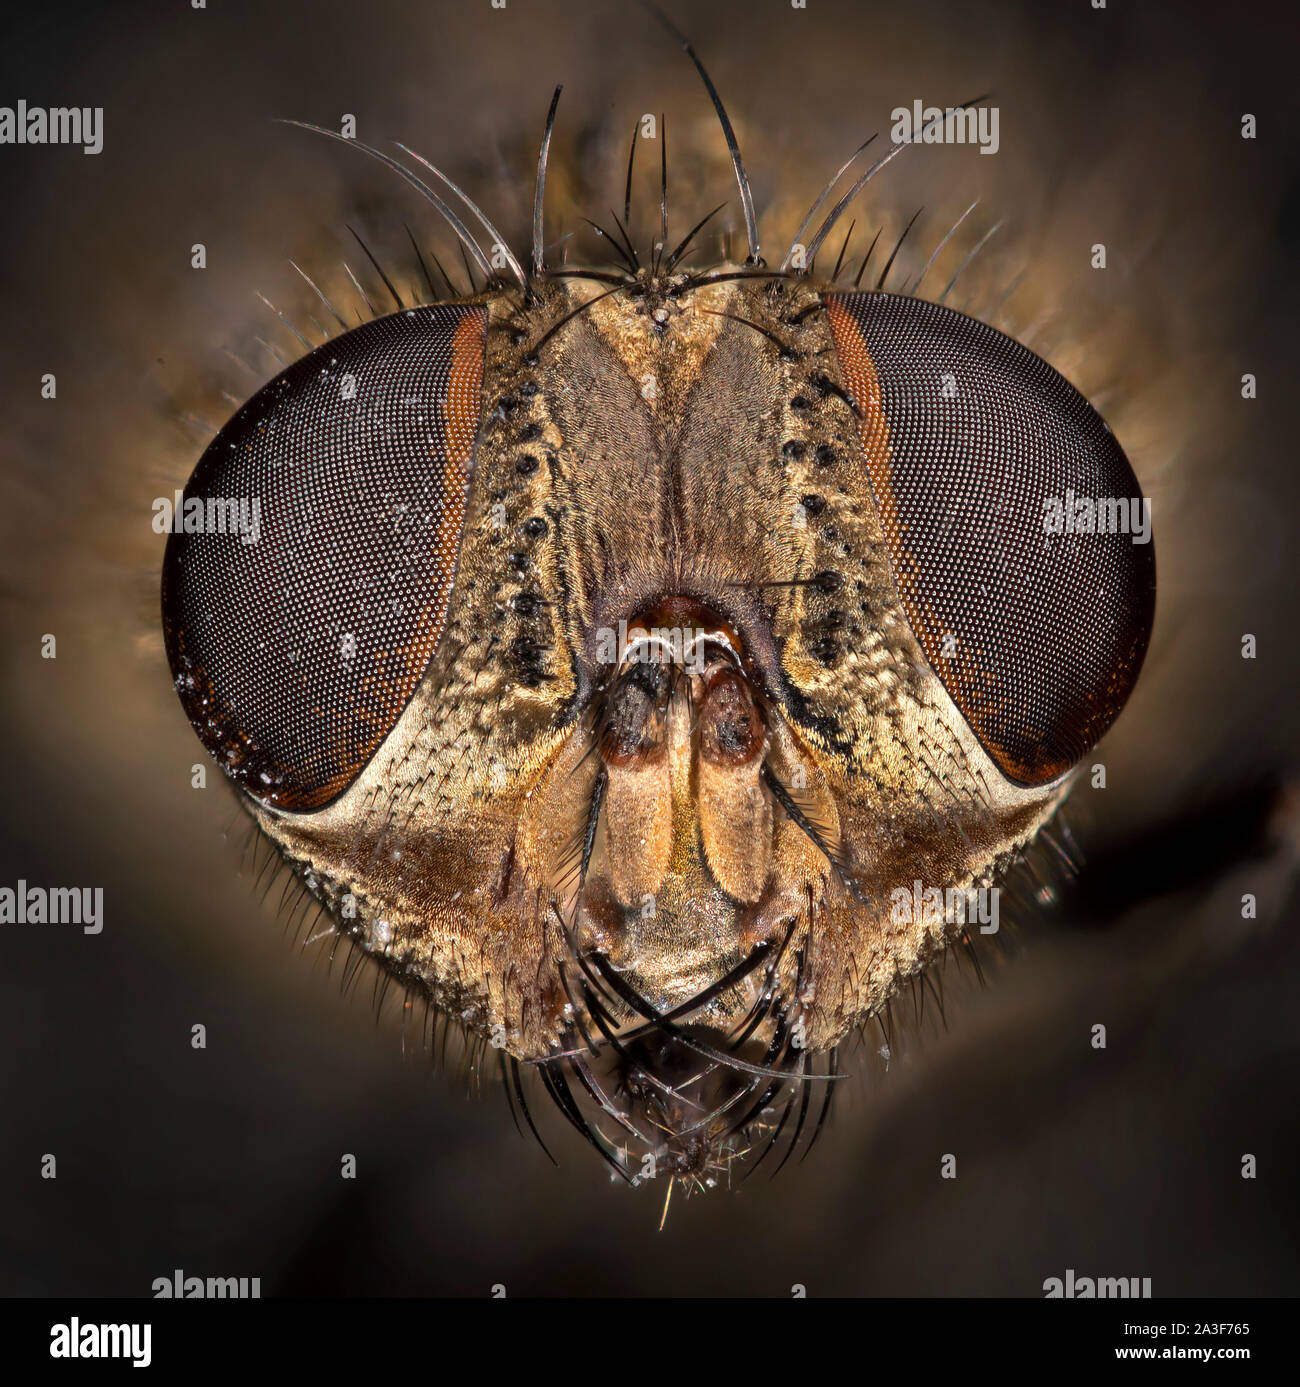 Cluster fly or attic fly. Pollenia sp. portrait view showing compound eyes and mouthparts. Stock Photo